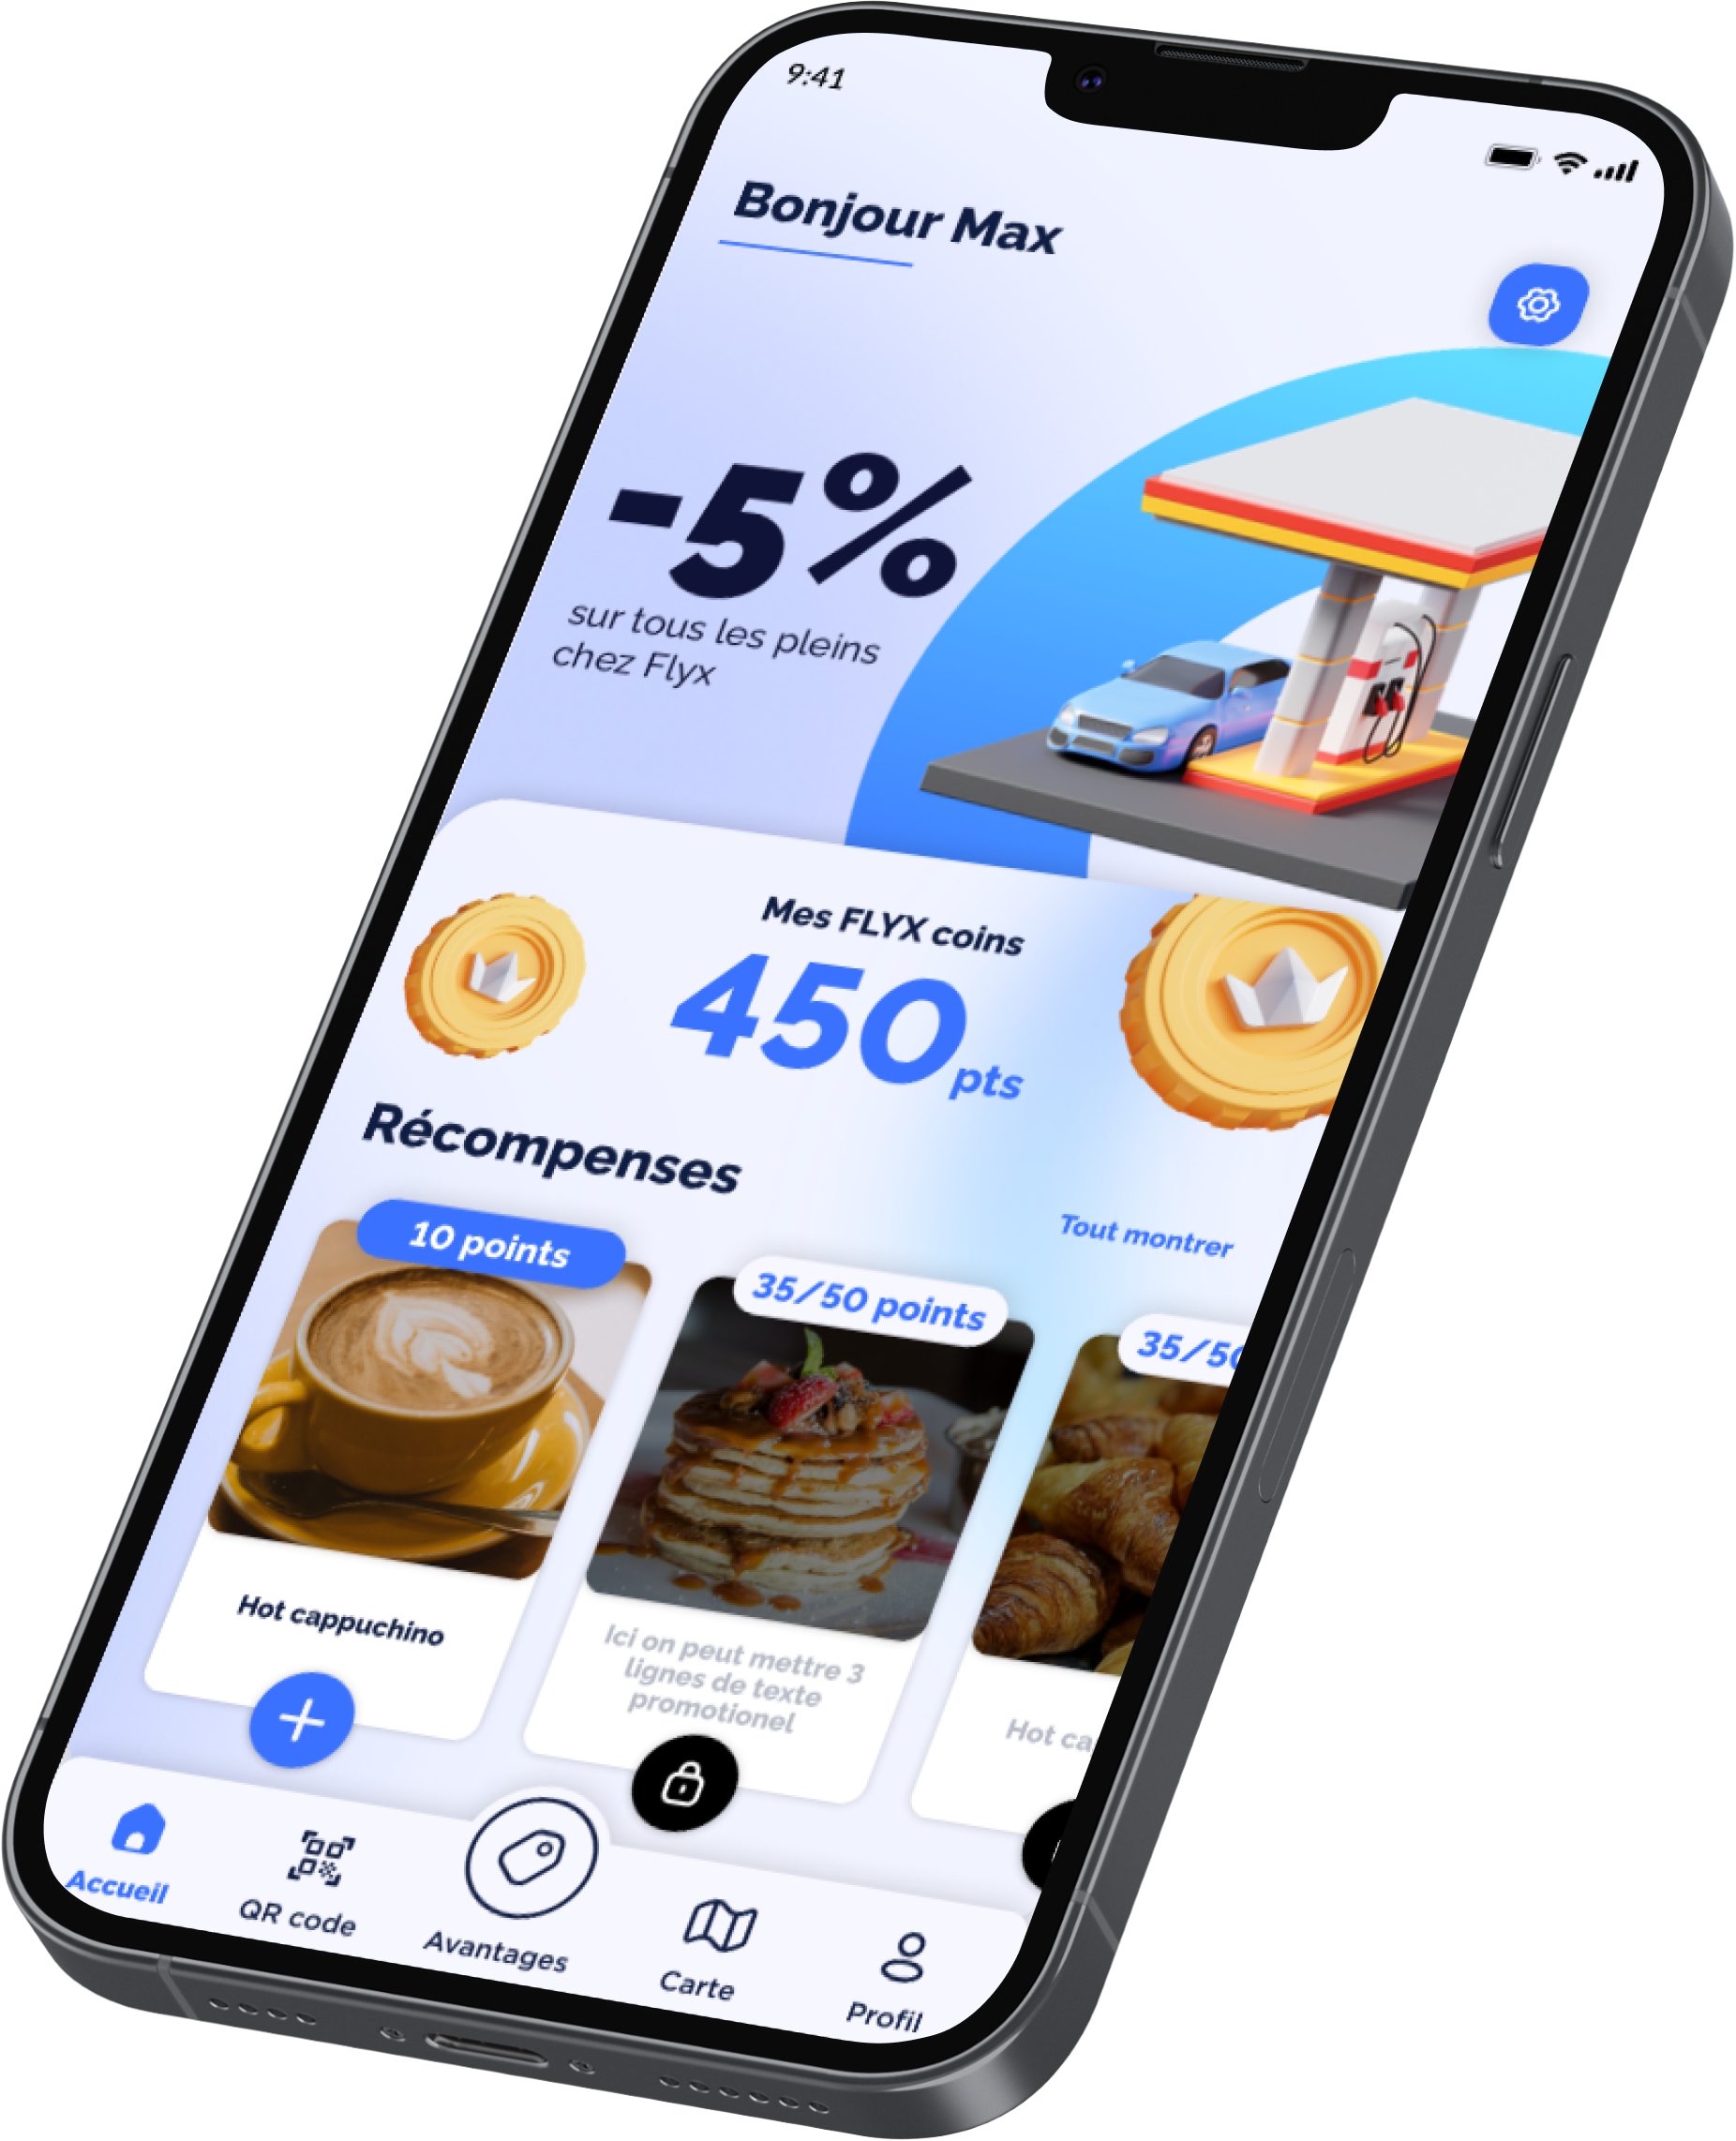 The FLYX Mobile App has been purpose-built for the retail, food, gas and oil and themepark sectors. Our templated mobile apps have been carefully designed to provide you with the flexibility you need and with the features your customers crave.